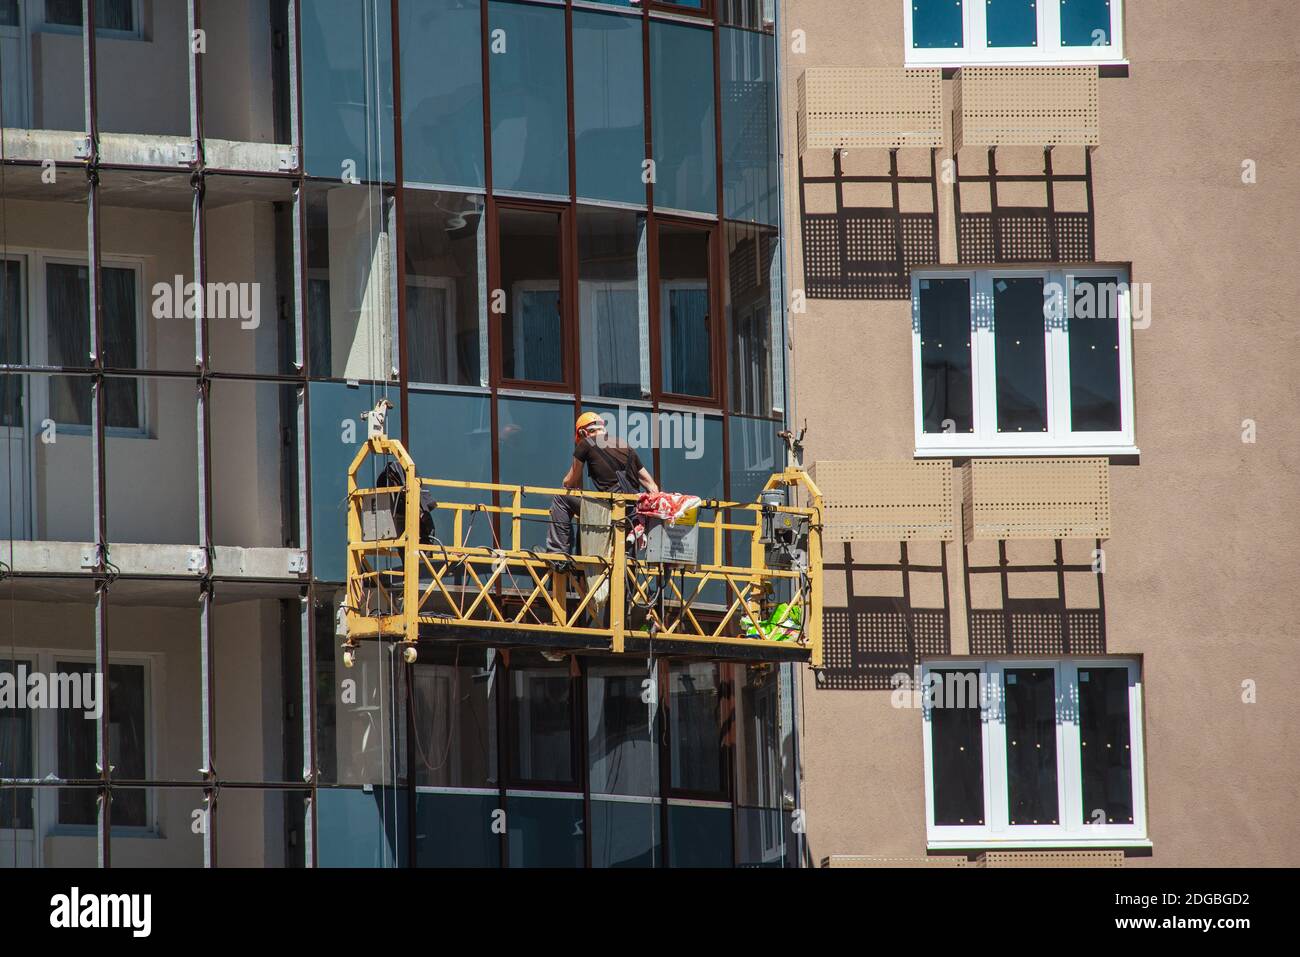 Window workers on a suspended platform working on a bilding facade Stock Photo